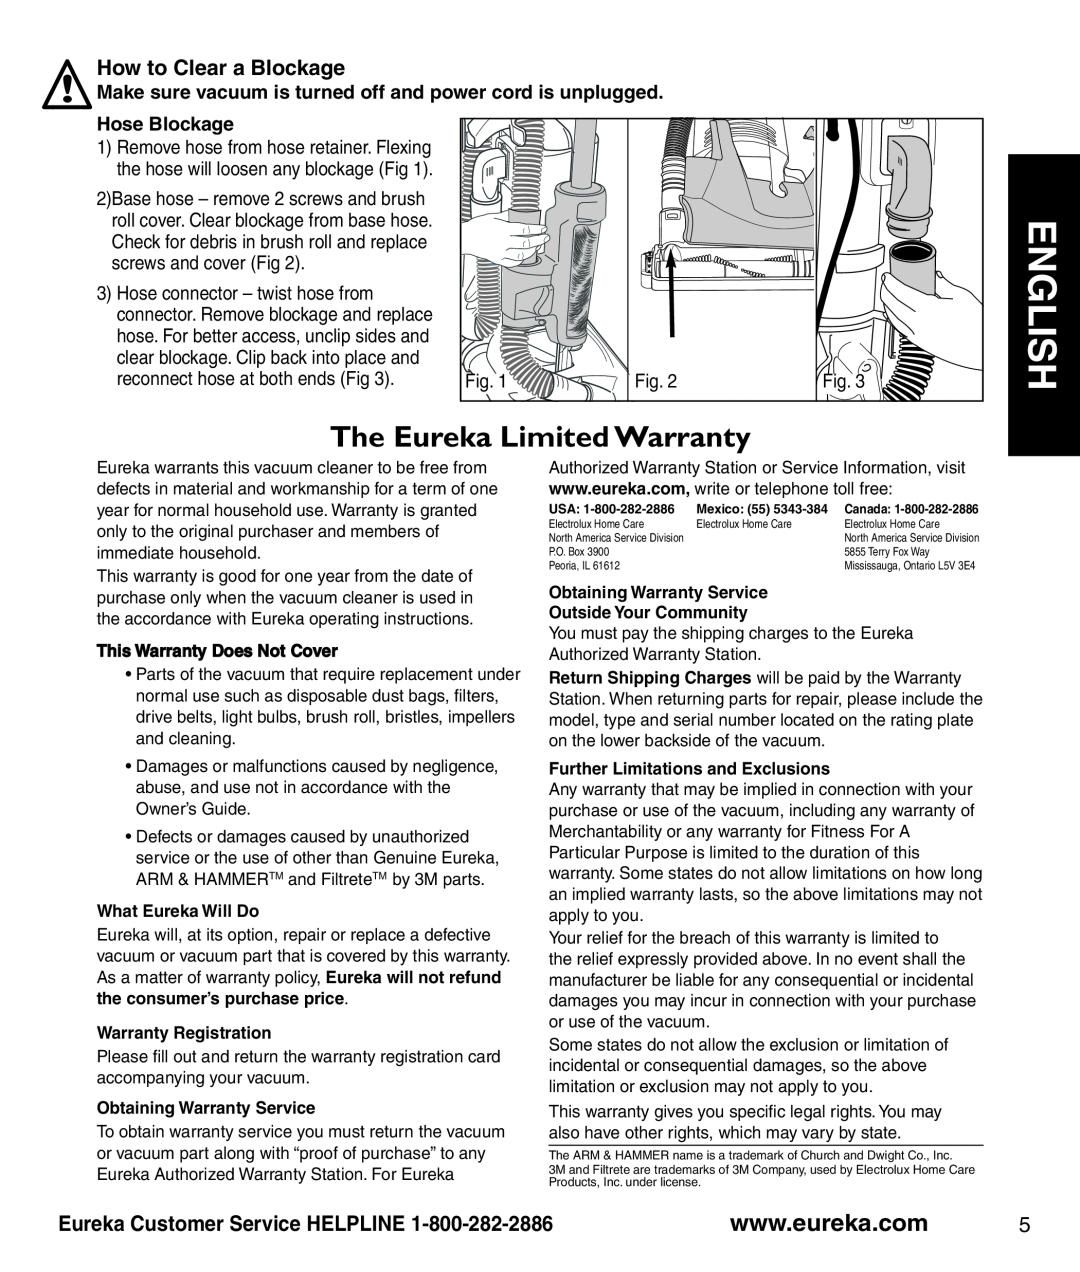 Eureka 2950-2996 Series How to Clear a Blockage, Hose Blockage, English, The Eureka Limited Warranty, What Eureka Will Do 